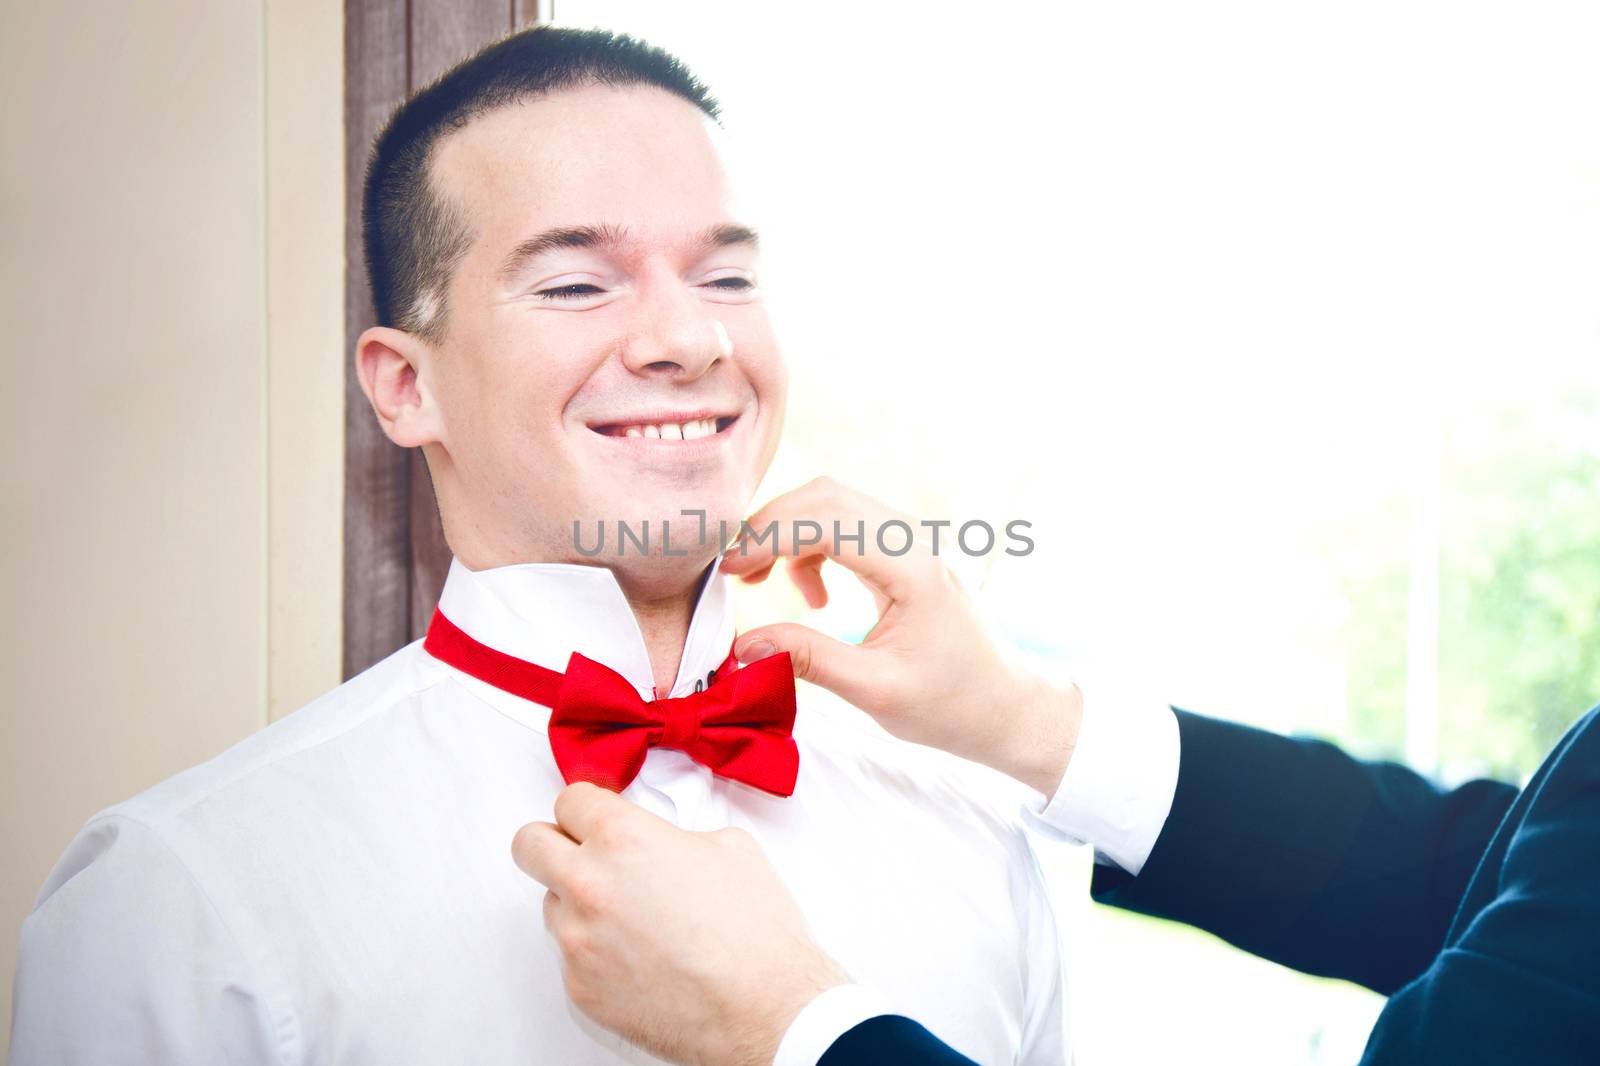 Groom prepared to get married by best man. Marriage and wedding concept image.